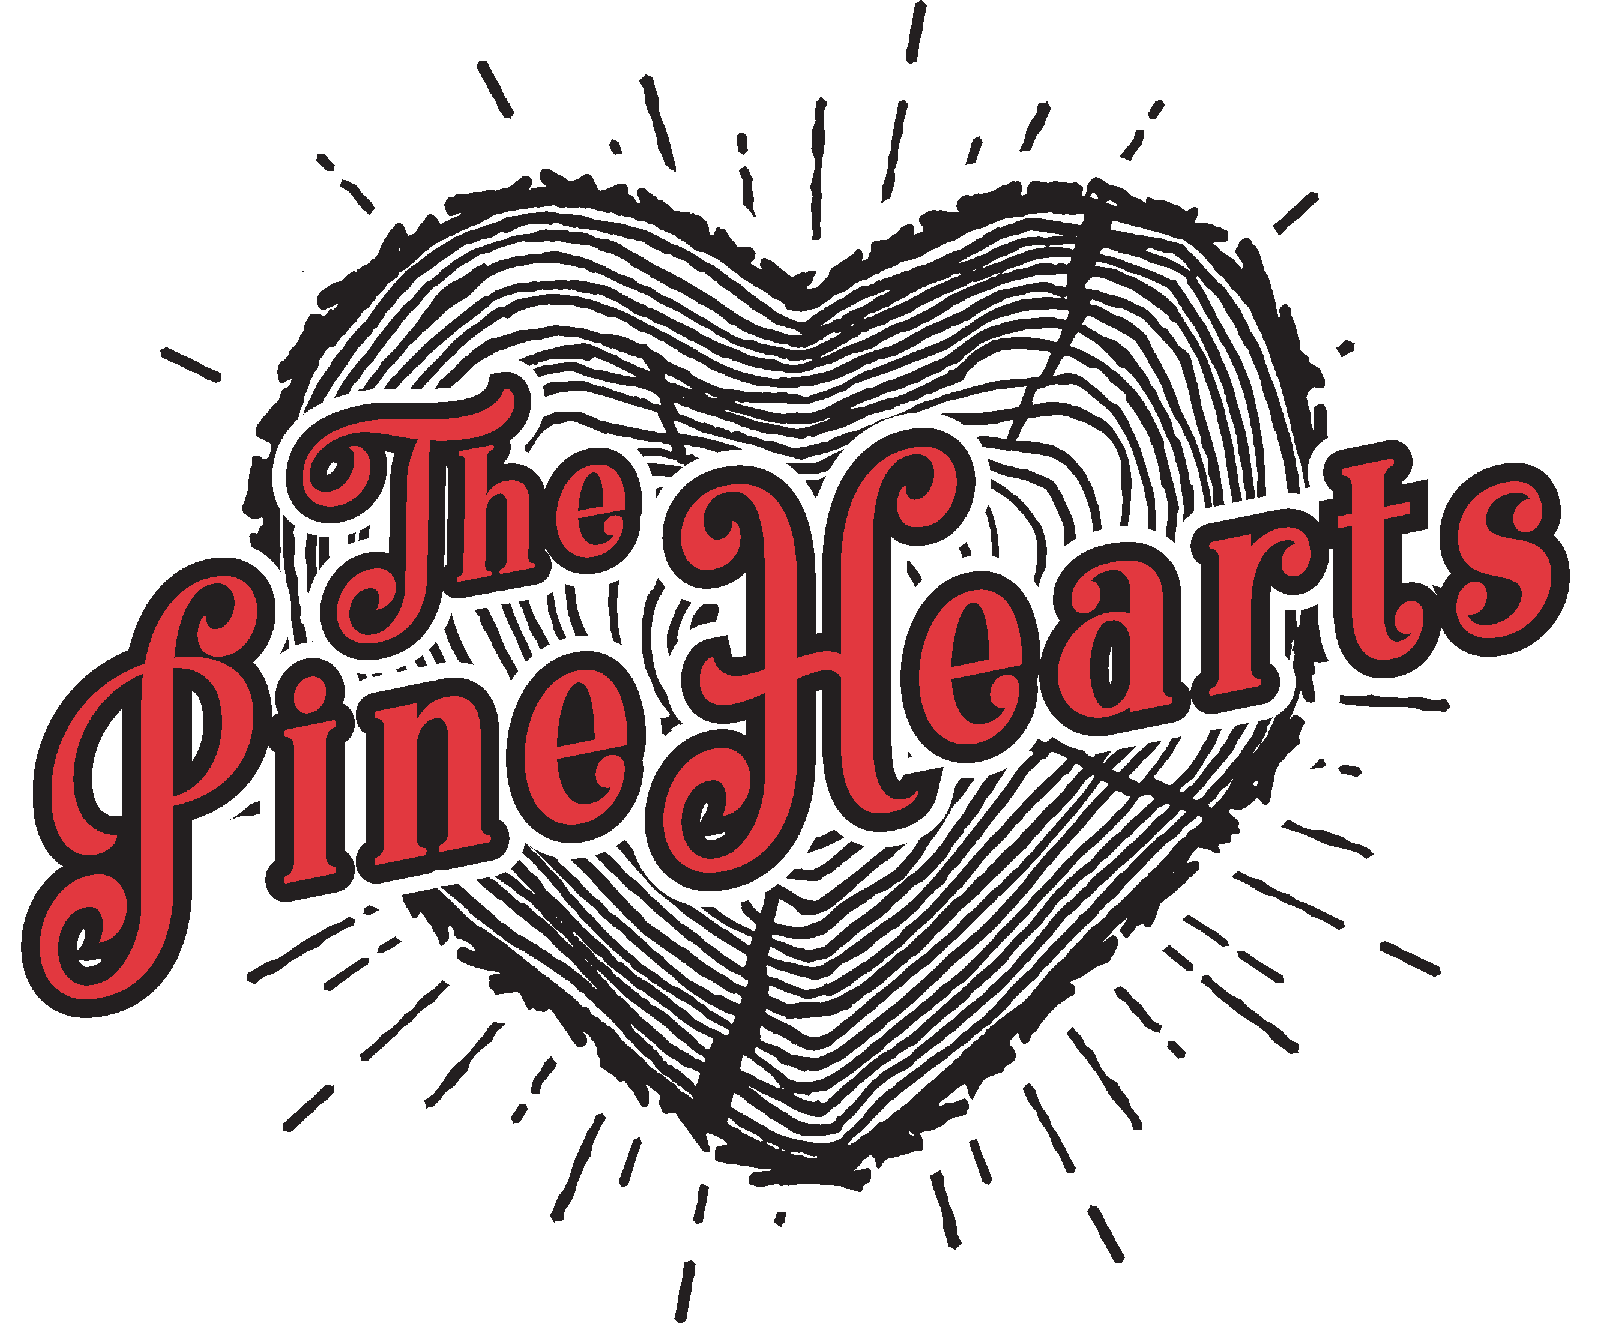 The Pine Hearts